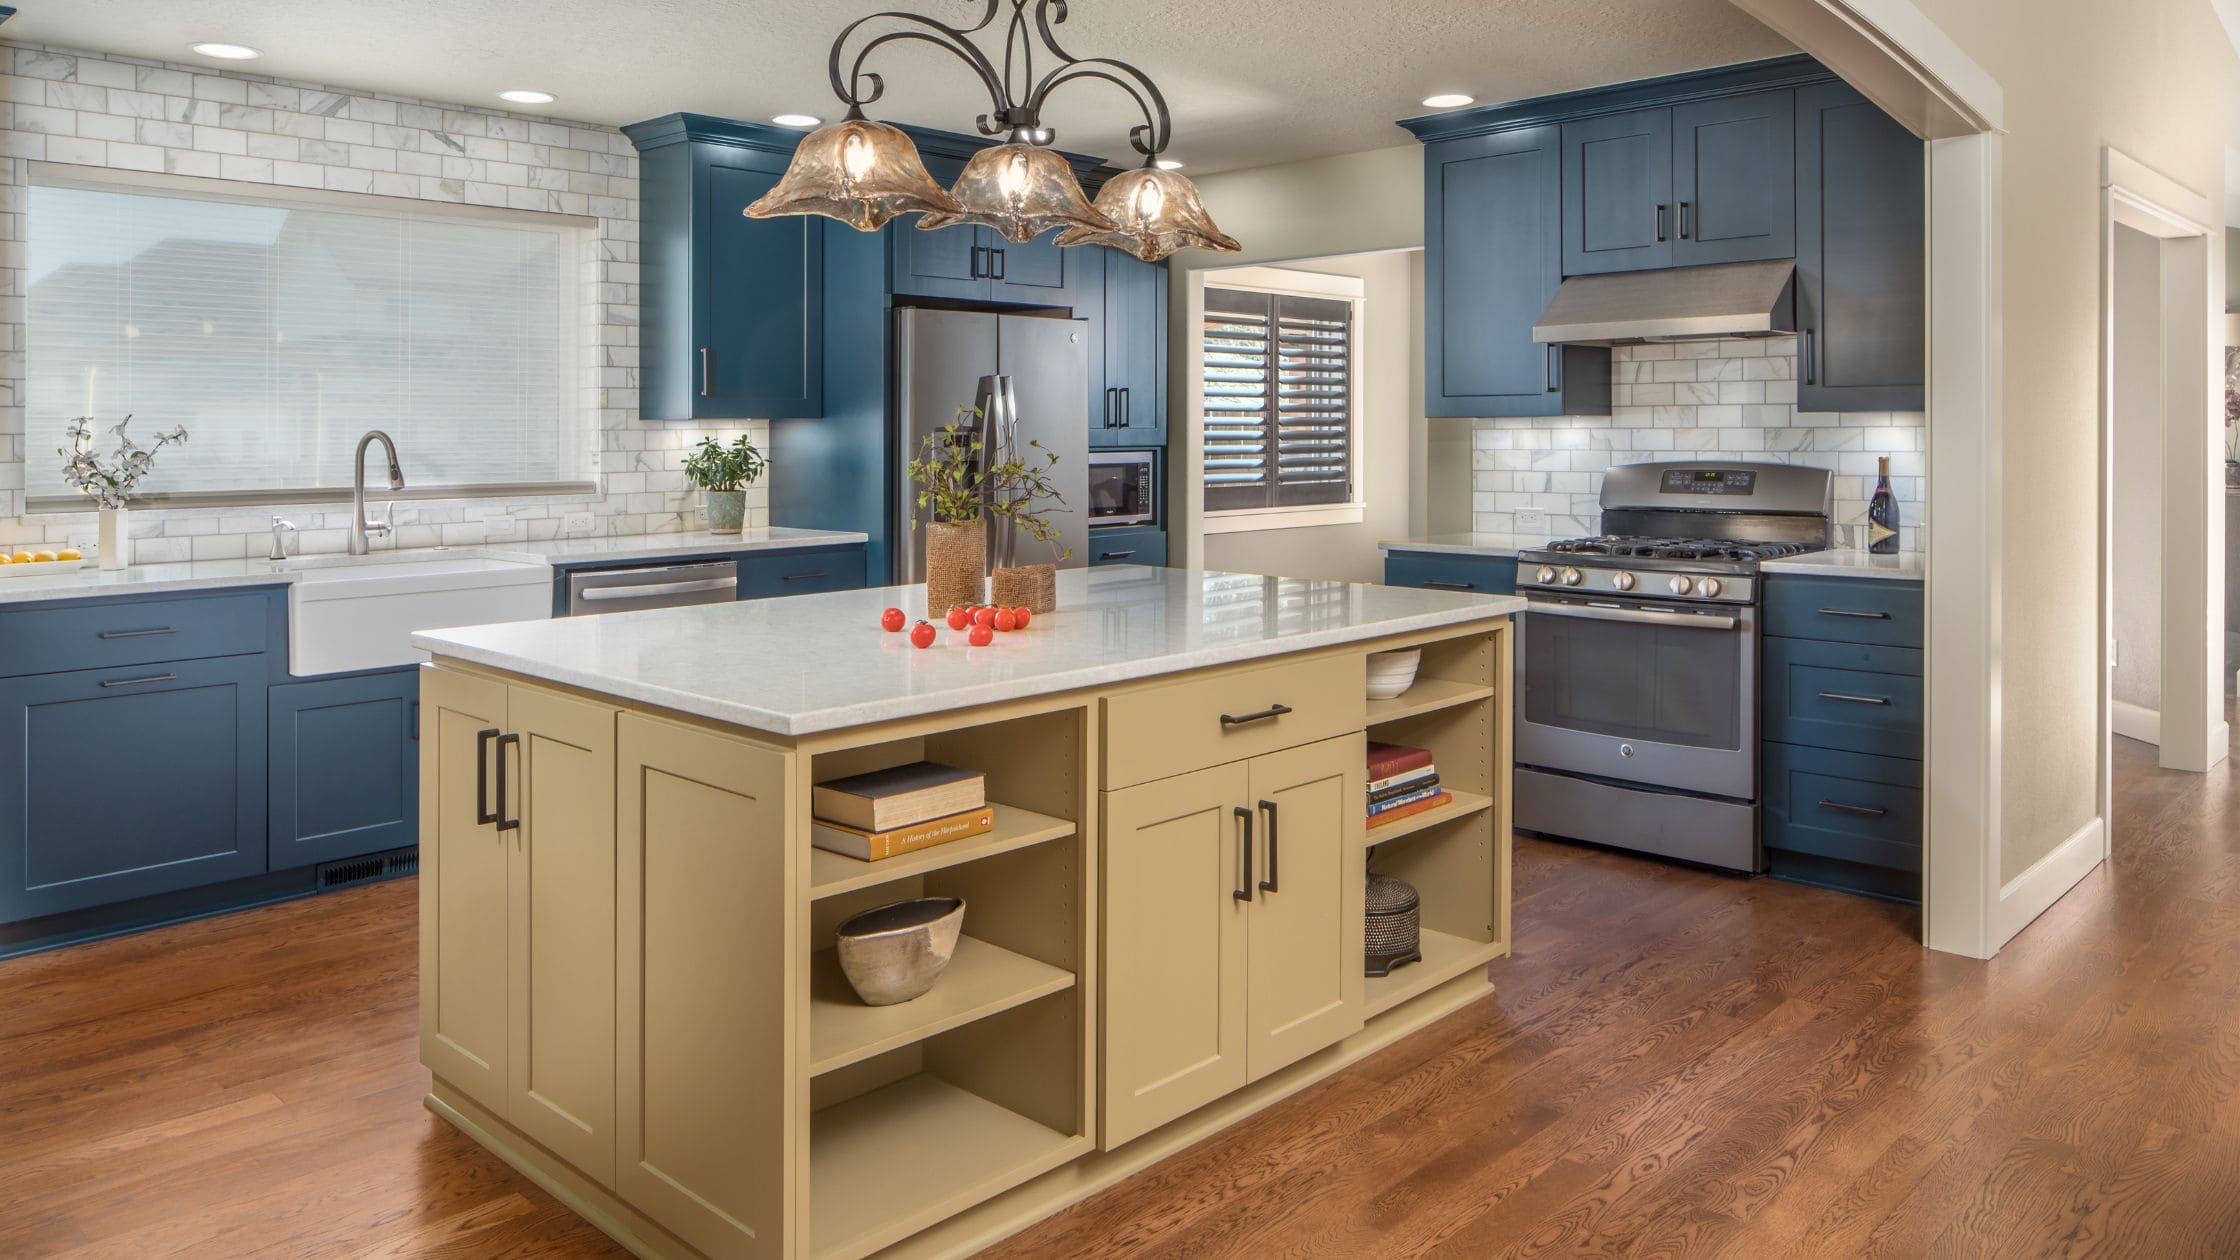 9 Kitchen Trends To Avoid In 2022   2023 #keepProtocol